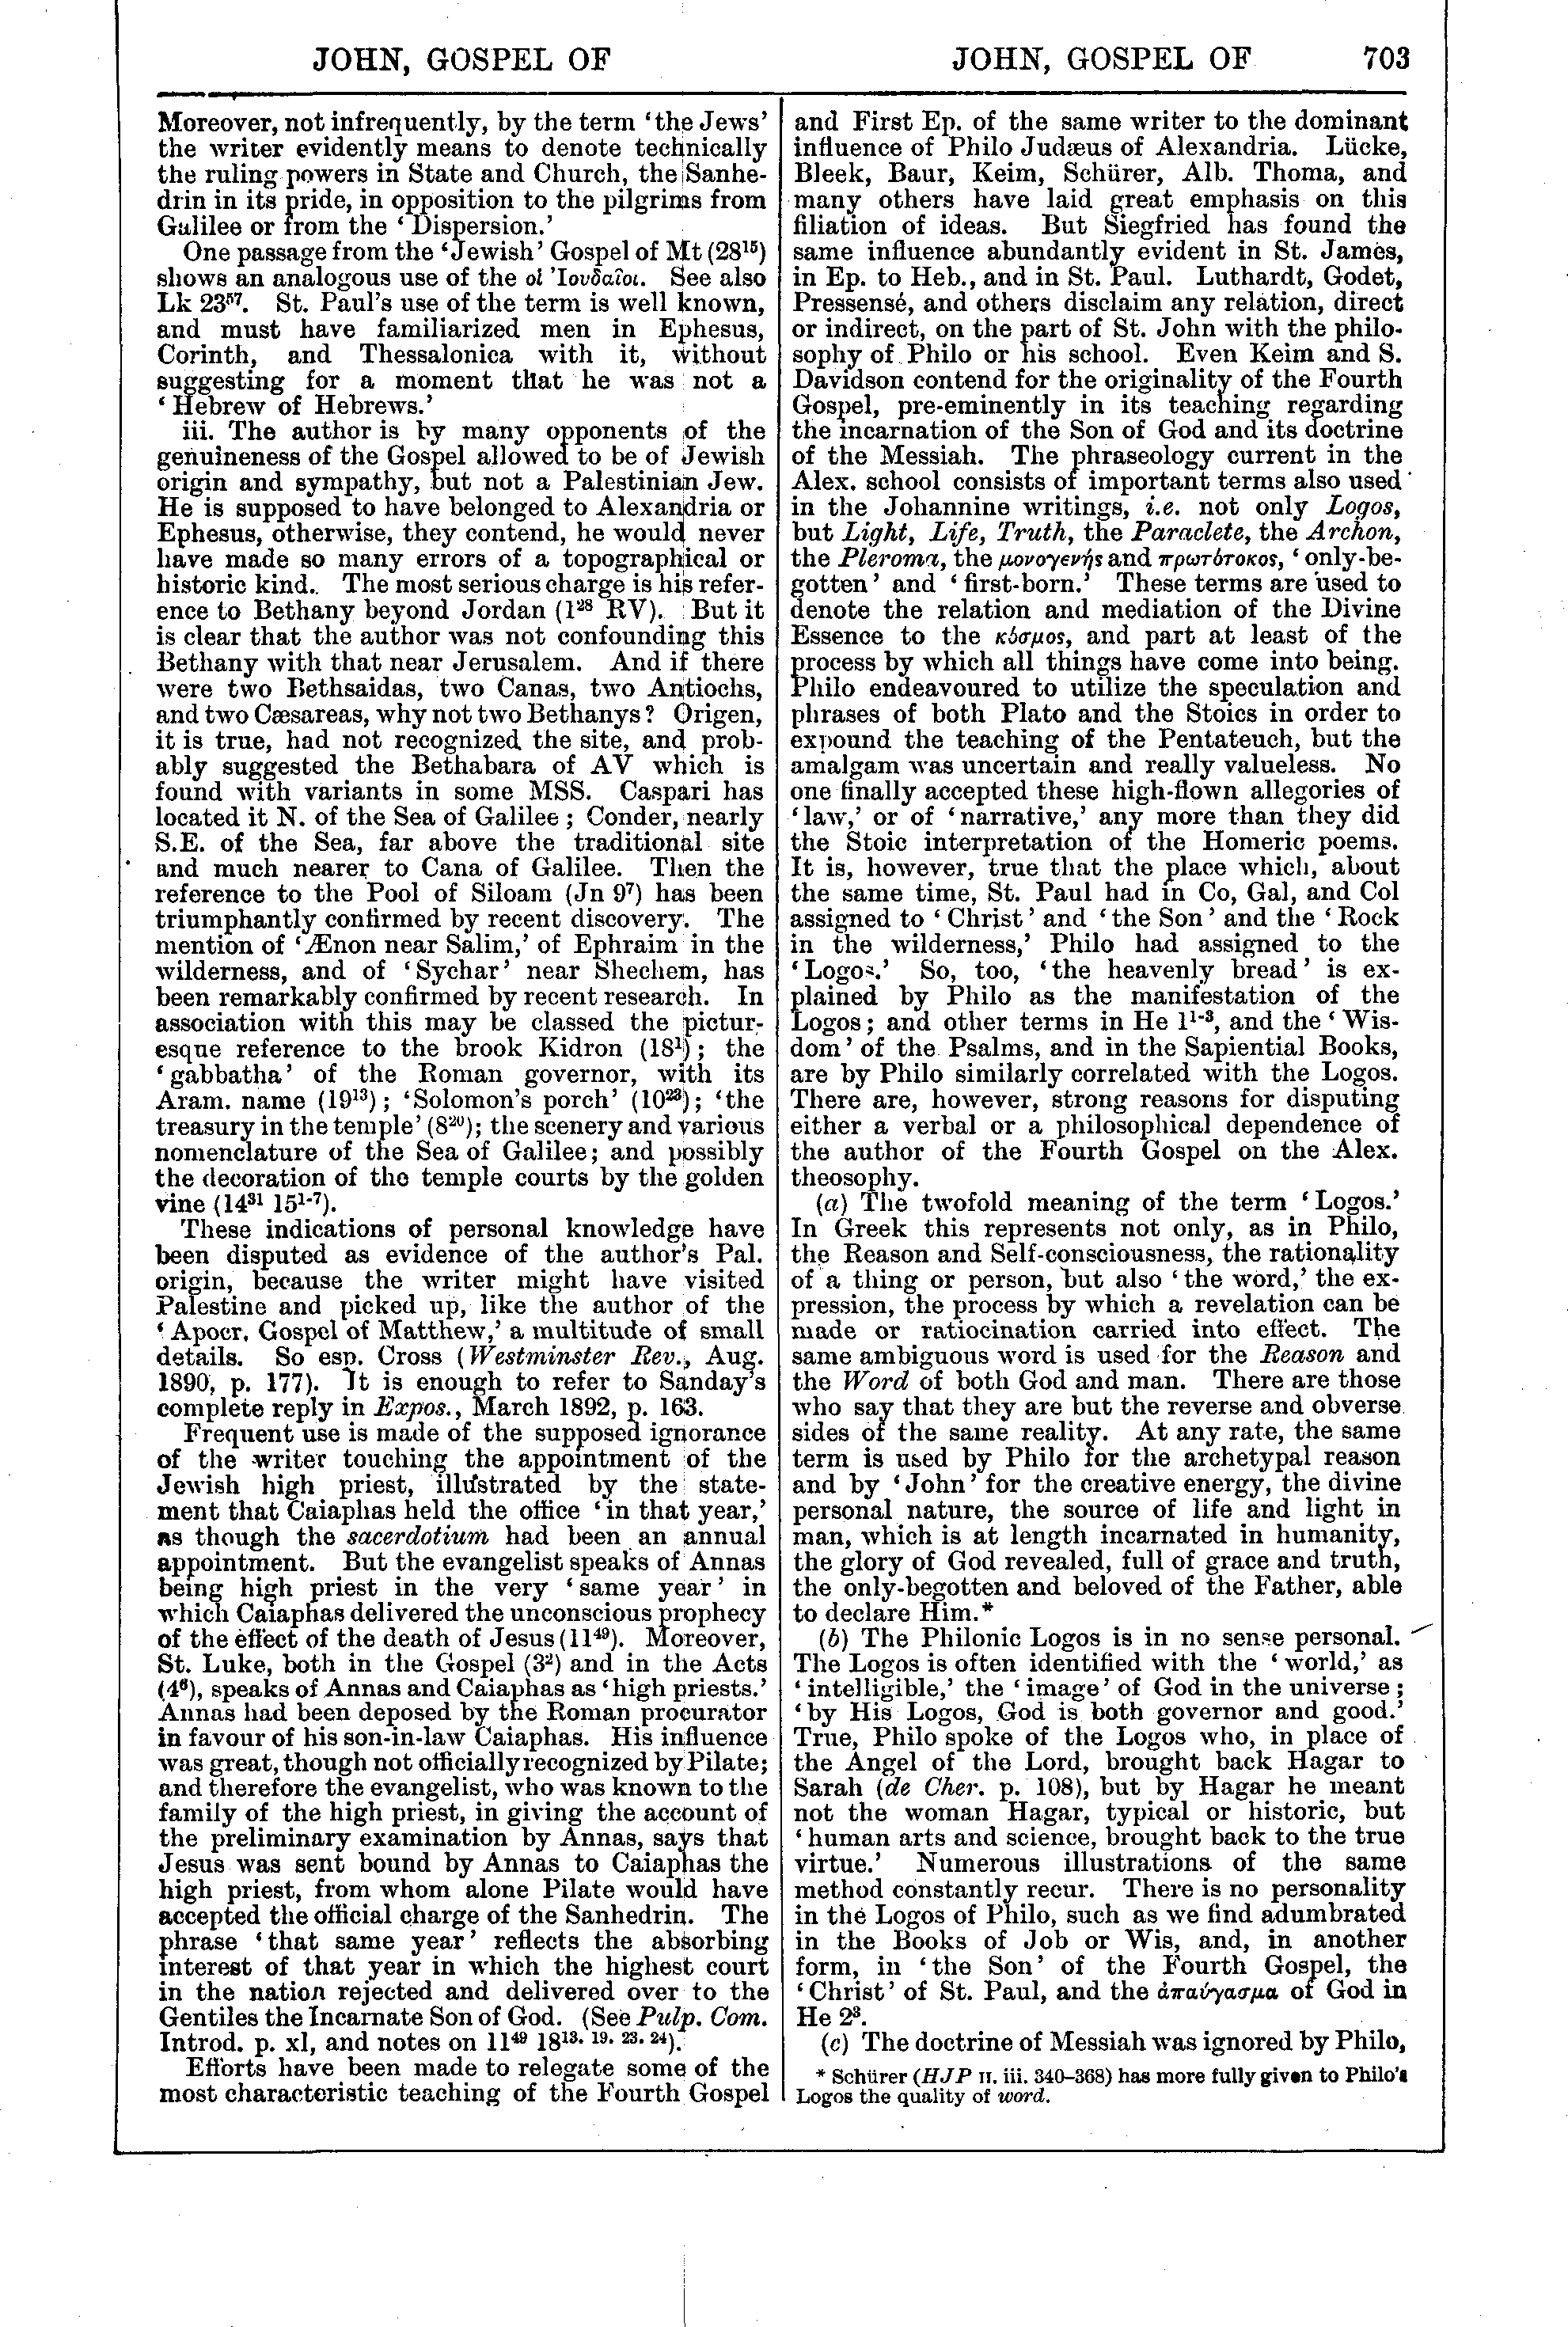 Image of page 703